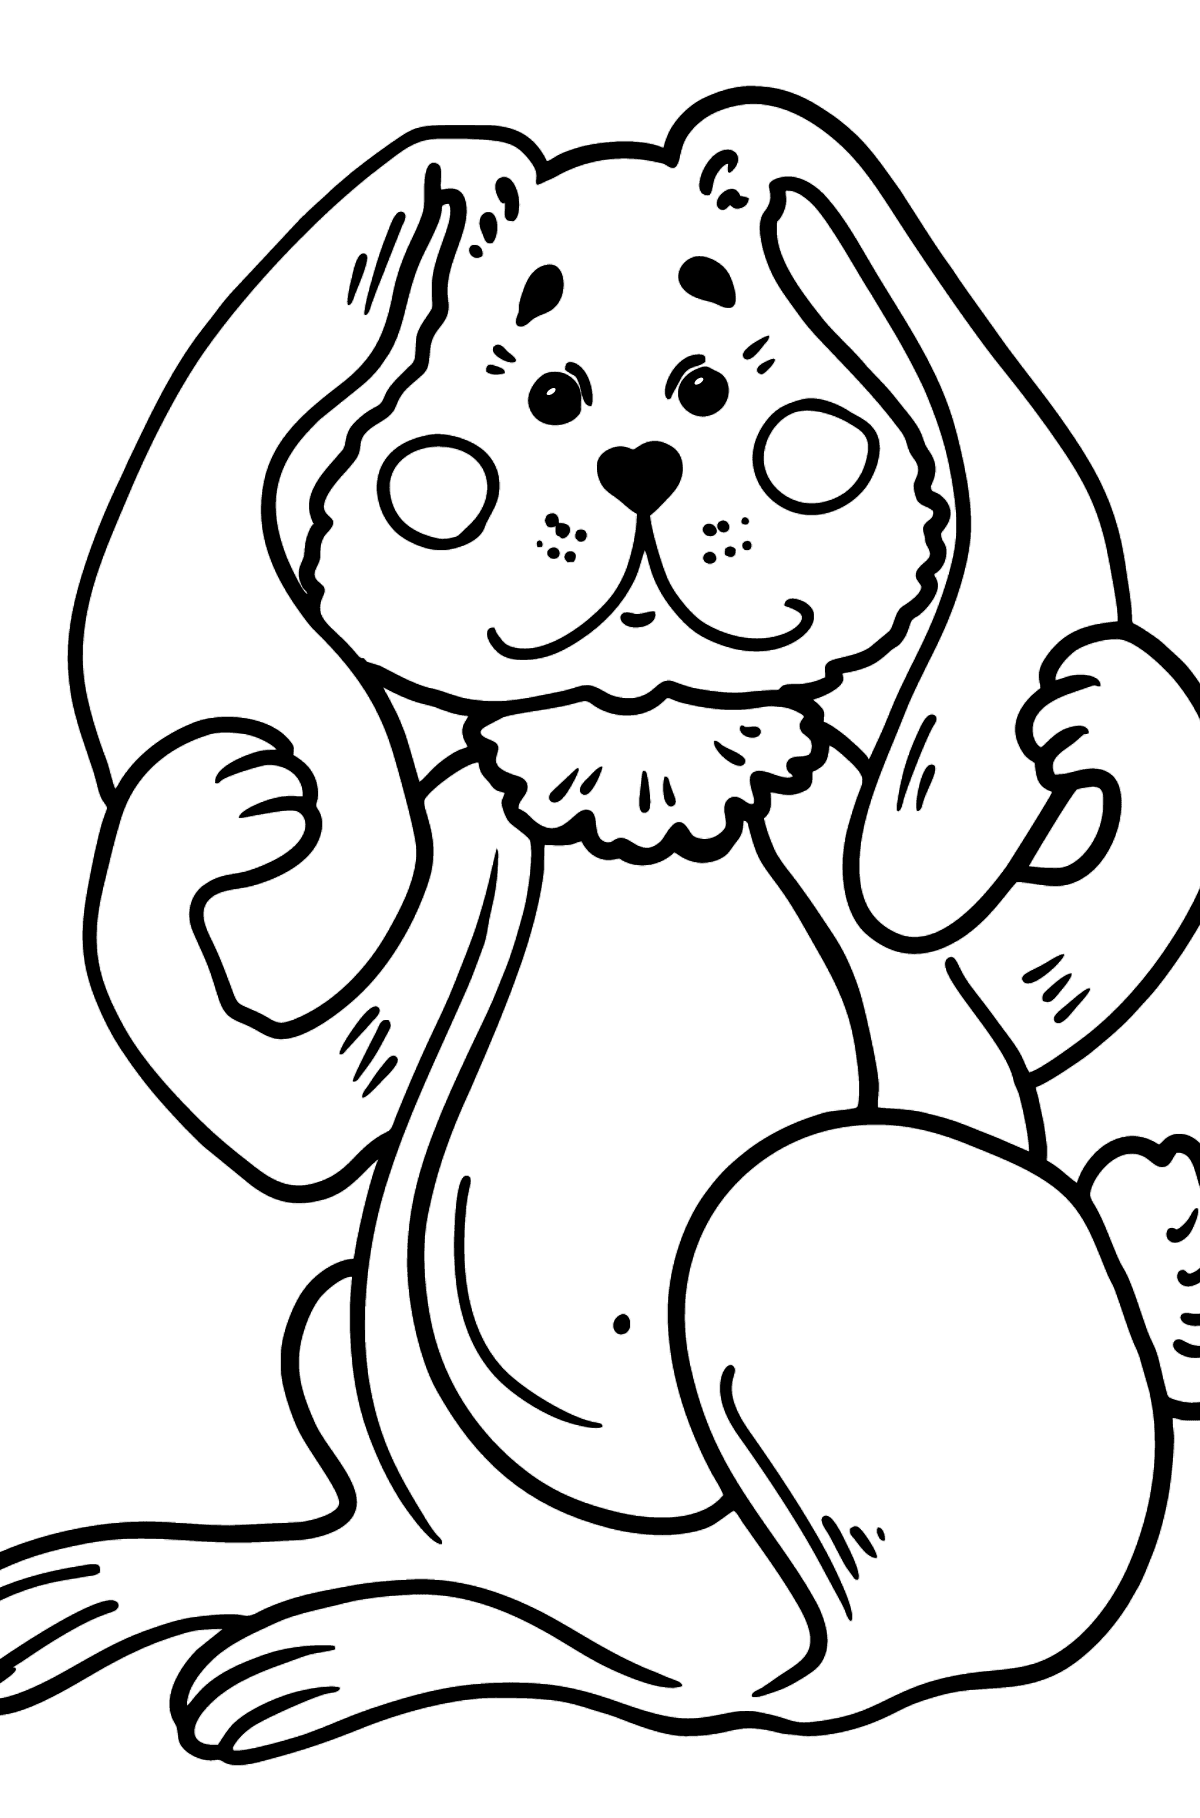 Sad Bunny coloring page - Coloring Pages for Kids